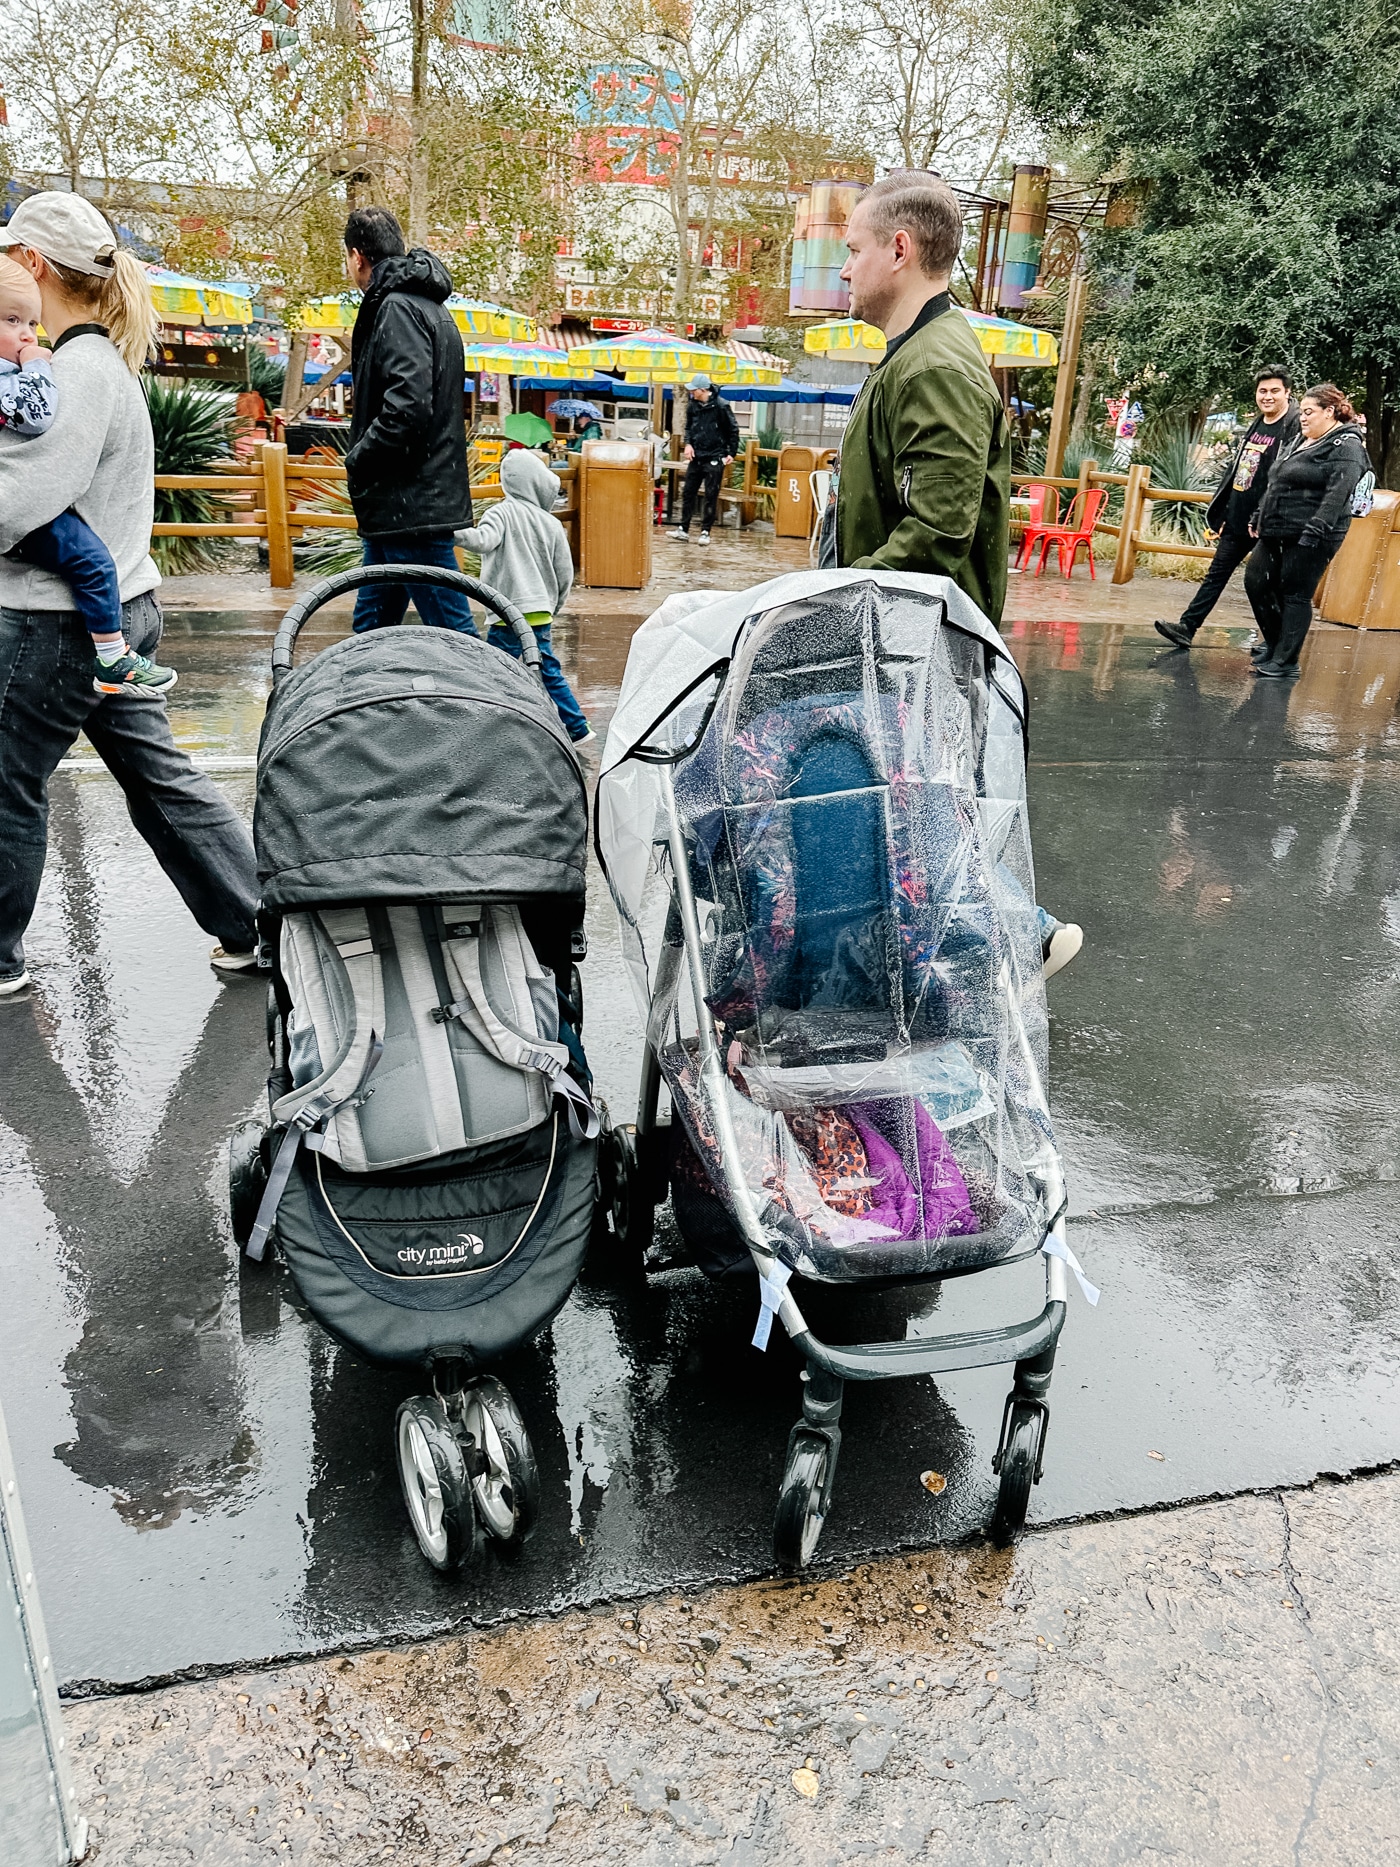 Rainy day at Disneyland with strollers side by side showing a rain stroller cover and a wet stroller without one. 